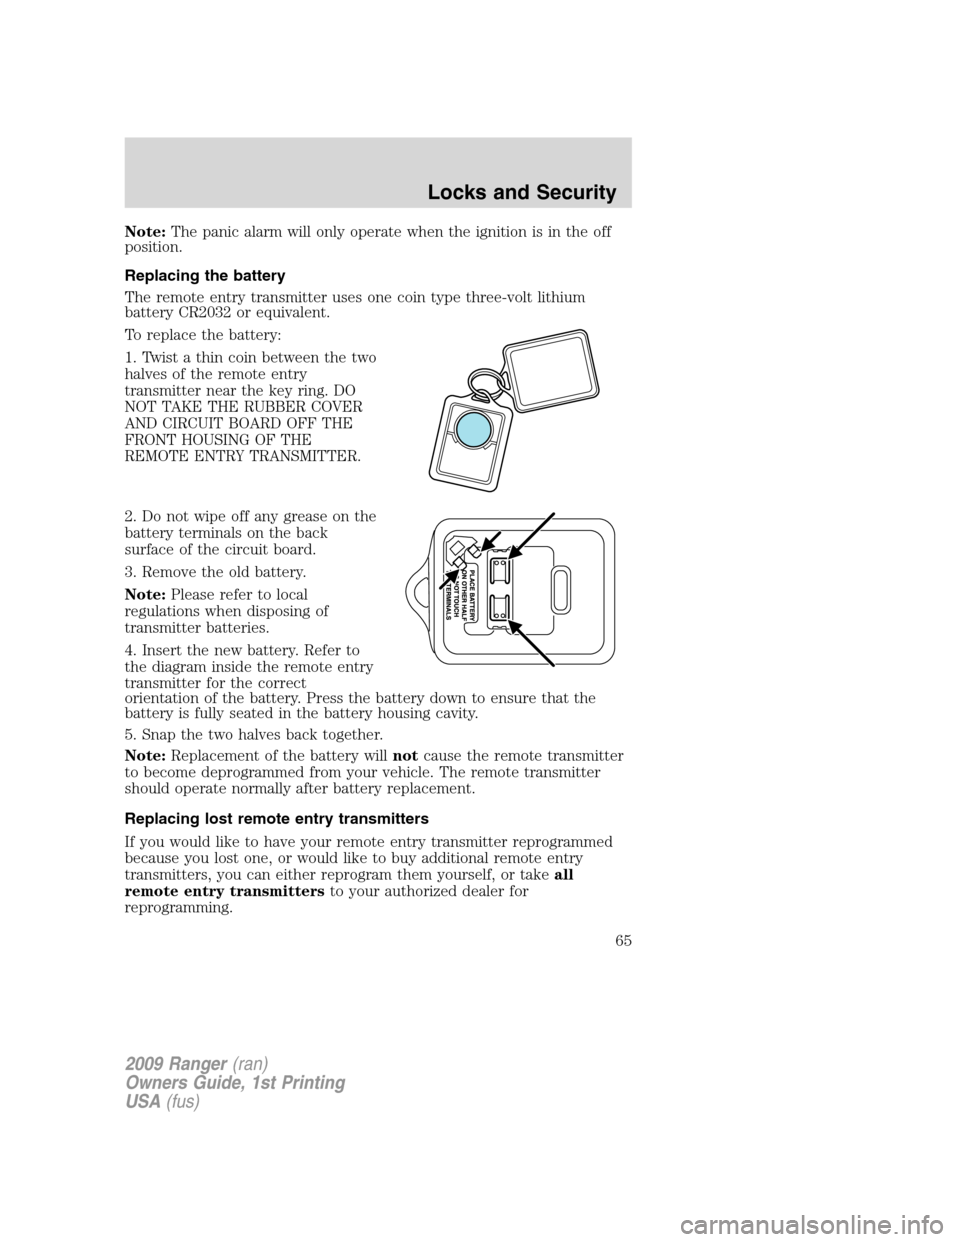 FORD RANGER 2009 2.G Owners Manual Note:The panic alarm will only operate when the ignition is in the off
position.
Replacing the battery
The remote entry transmitter uses one coin type three-volt lithium
battery CR2032 or equivalent.
